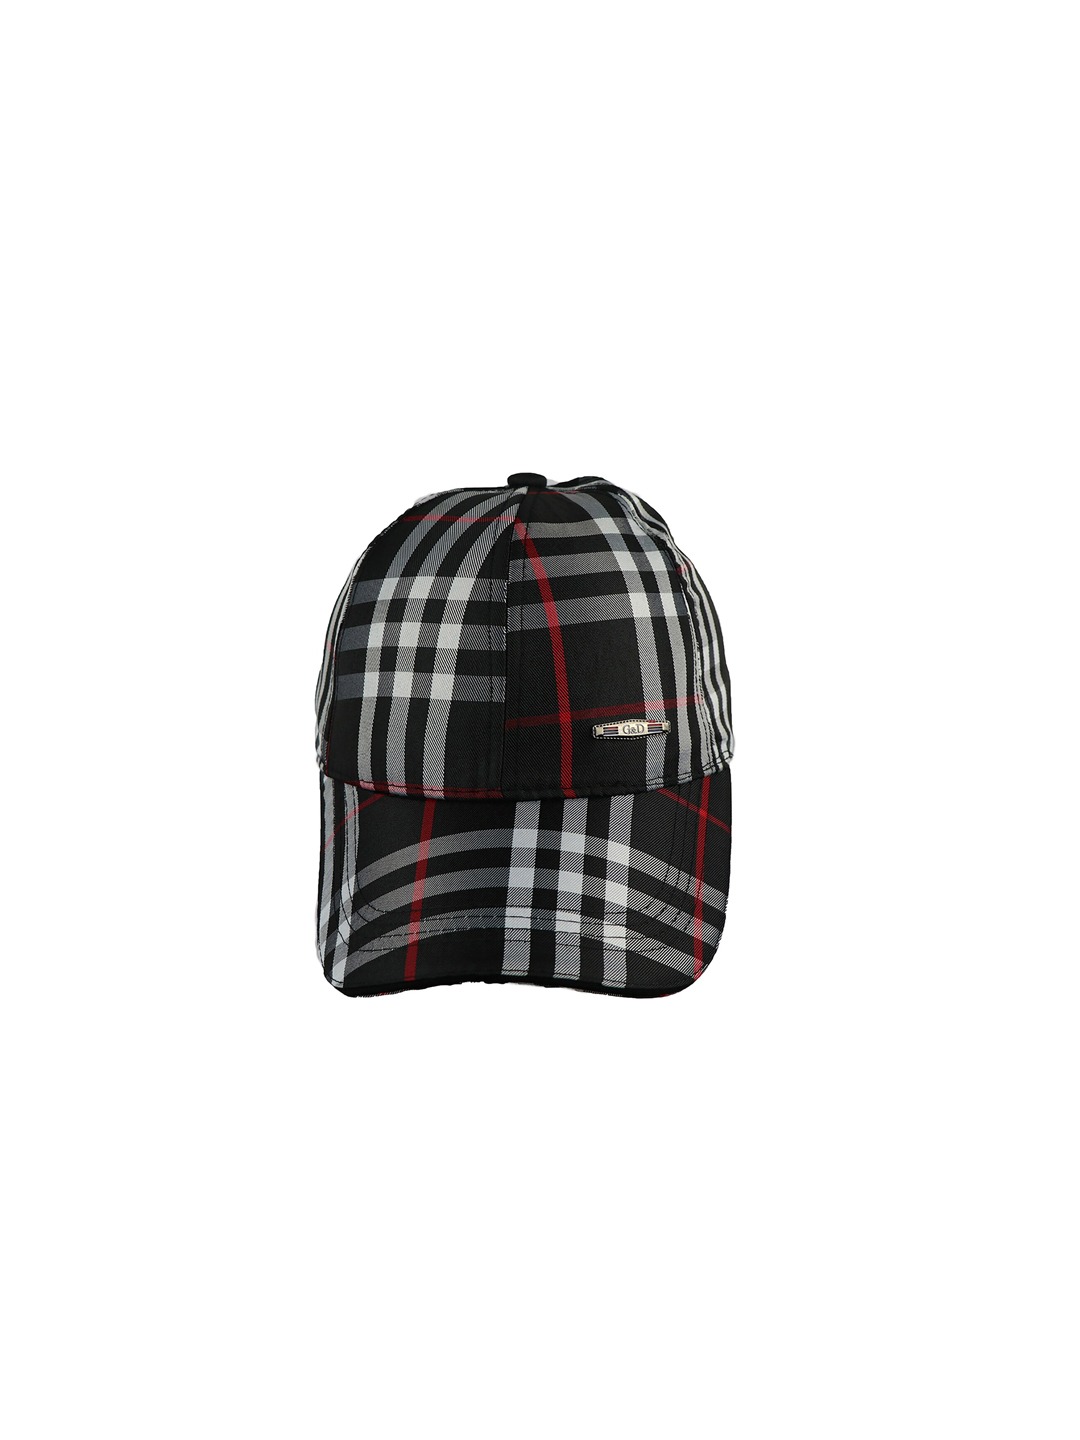 Accessories Caps | iSWEVEN Unisex Black & White Checked Adjustable Snapback Cap - IF72768